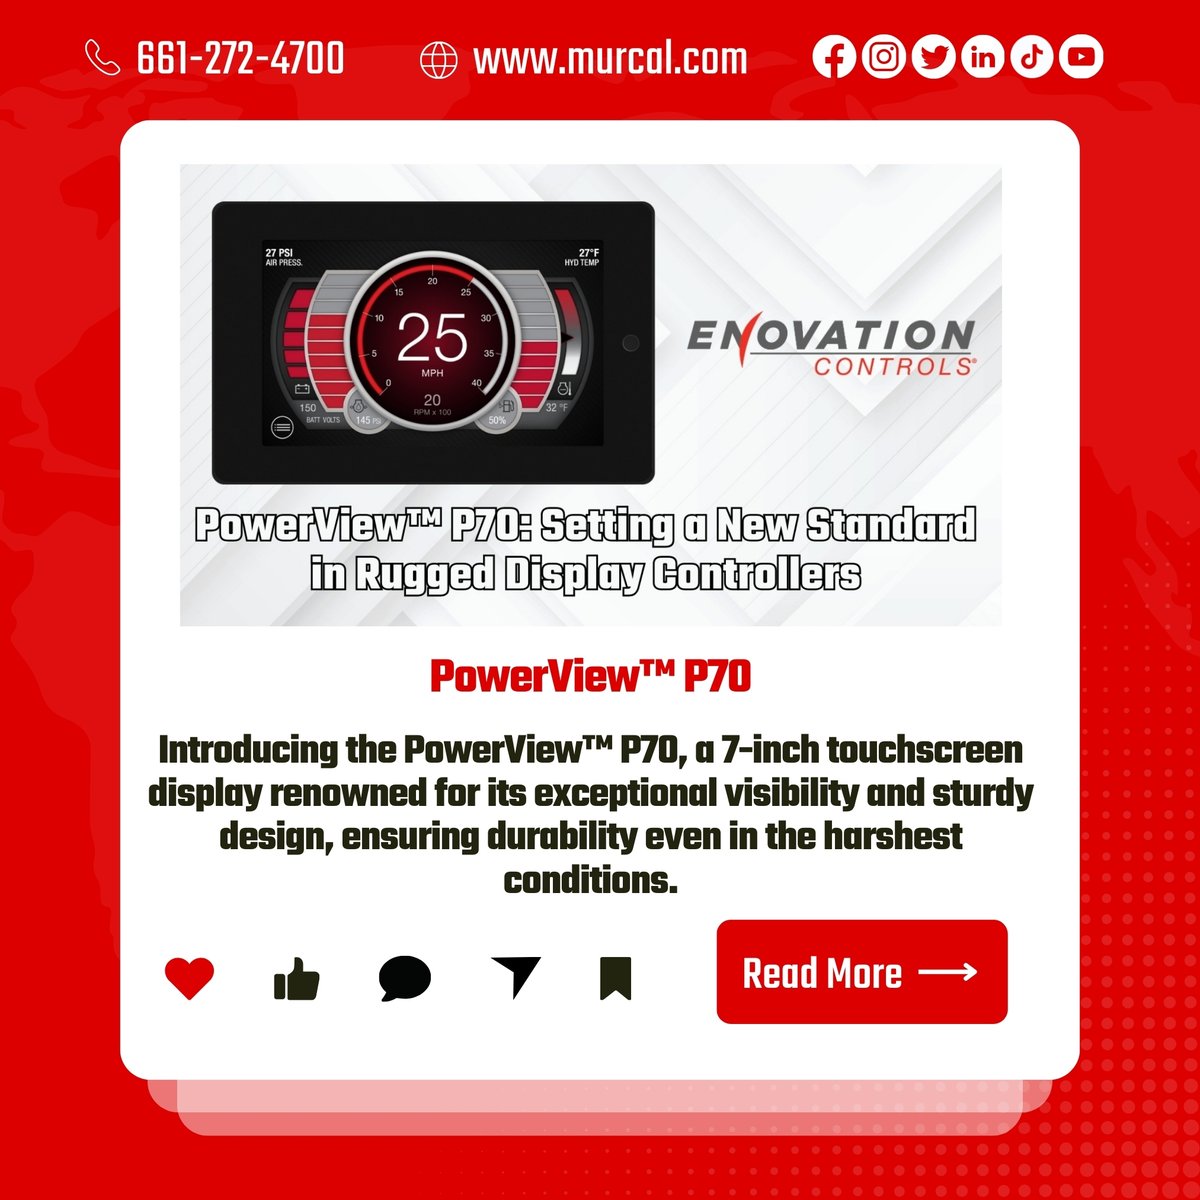 Check out our #ExpertAdvice 💡 article with information about the new PowerView™ P70, Setting a New Standard in Rugged Display Controllers!

murcal.com/blog/powerview…

#NewArticle #ArticleAlert #PowerViewP70 #RuggedDisplay #DisplayControllers #TechNews #ProductLaunch #Innovation